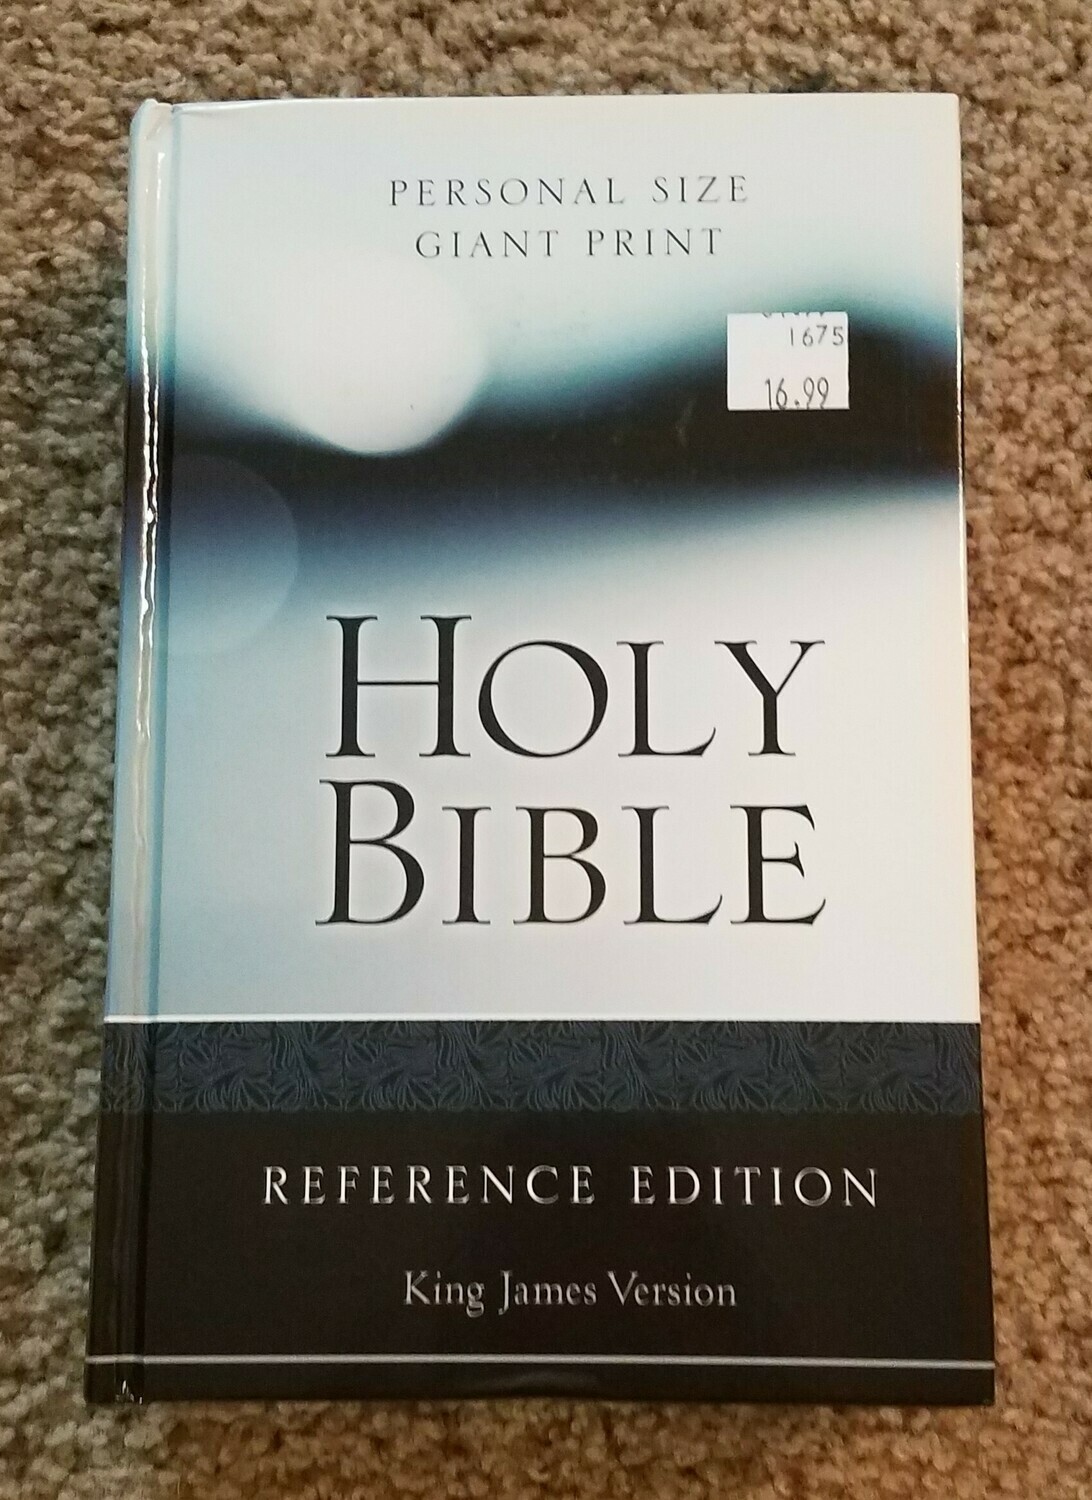 Holy Bible Reference Edition - King James Version